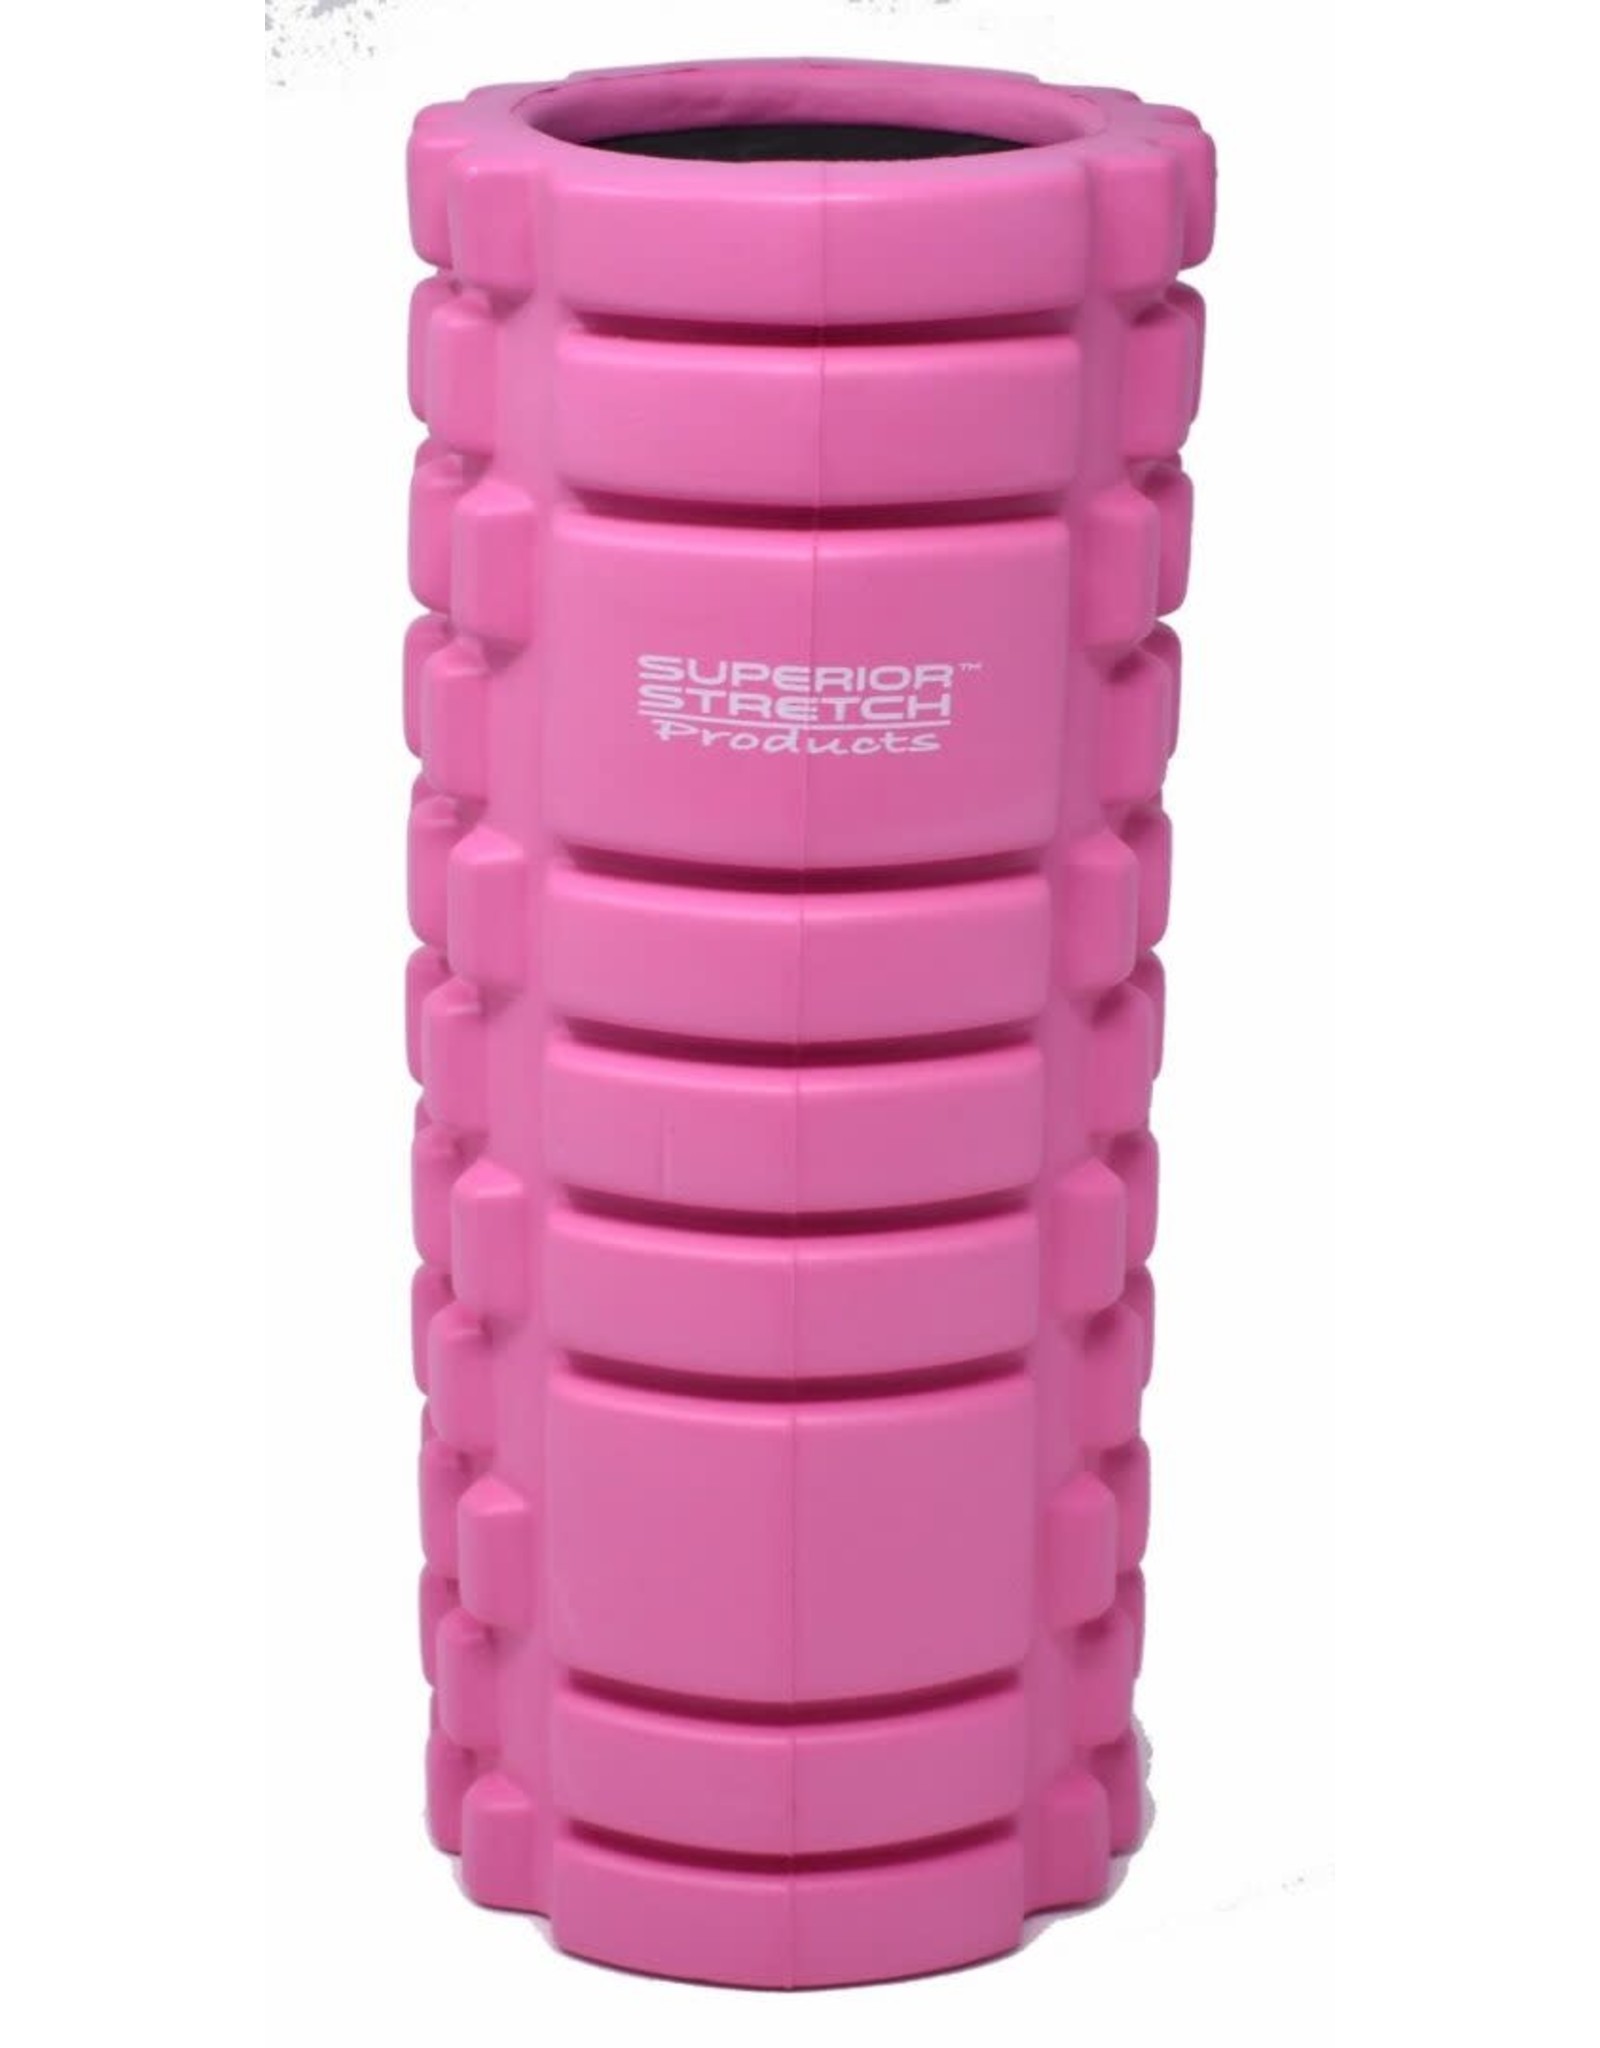 SUPERIOR STRETCH PRODUCTS Foam Fitness Roller - PINK